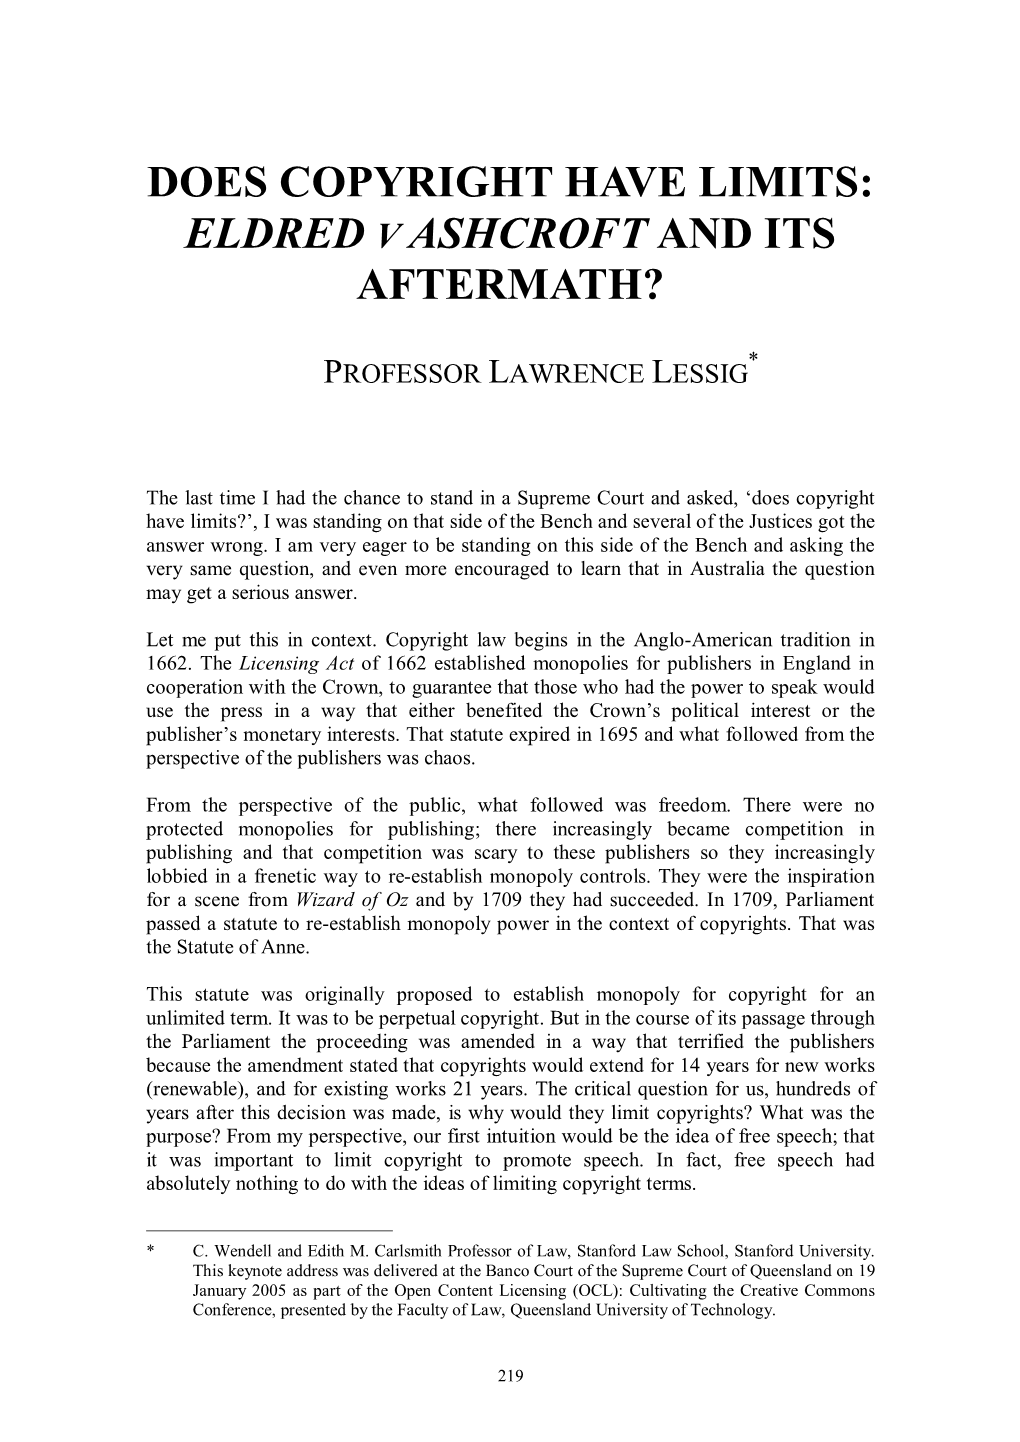 Does Copyright Have Limits: Eldred V Ashcroft and Its Aftermath?